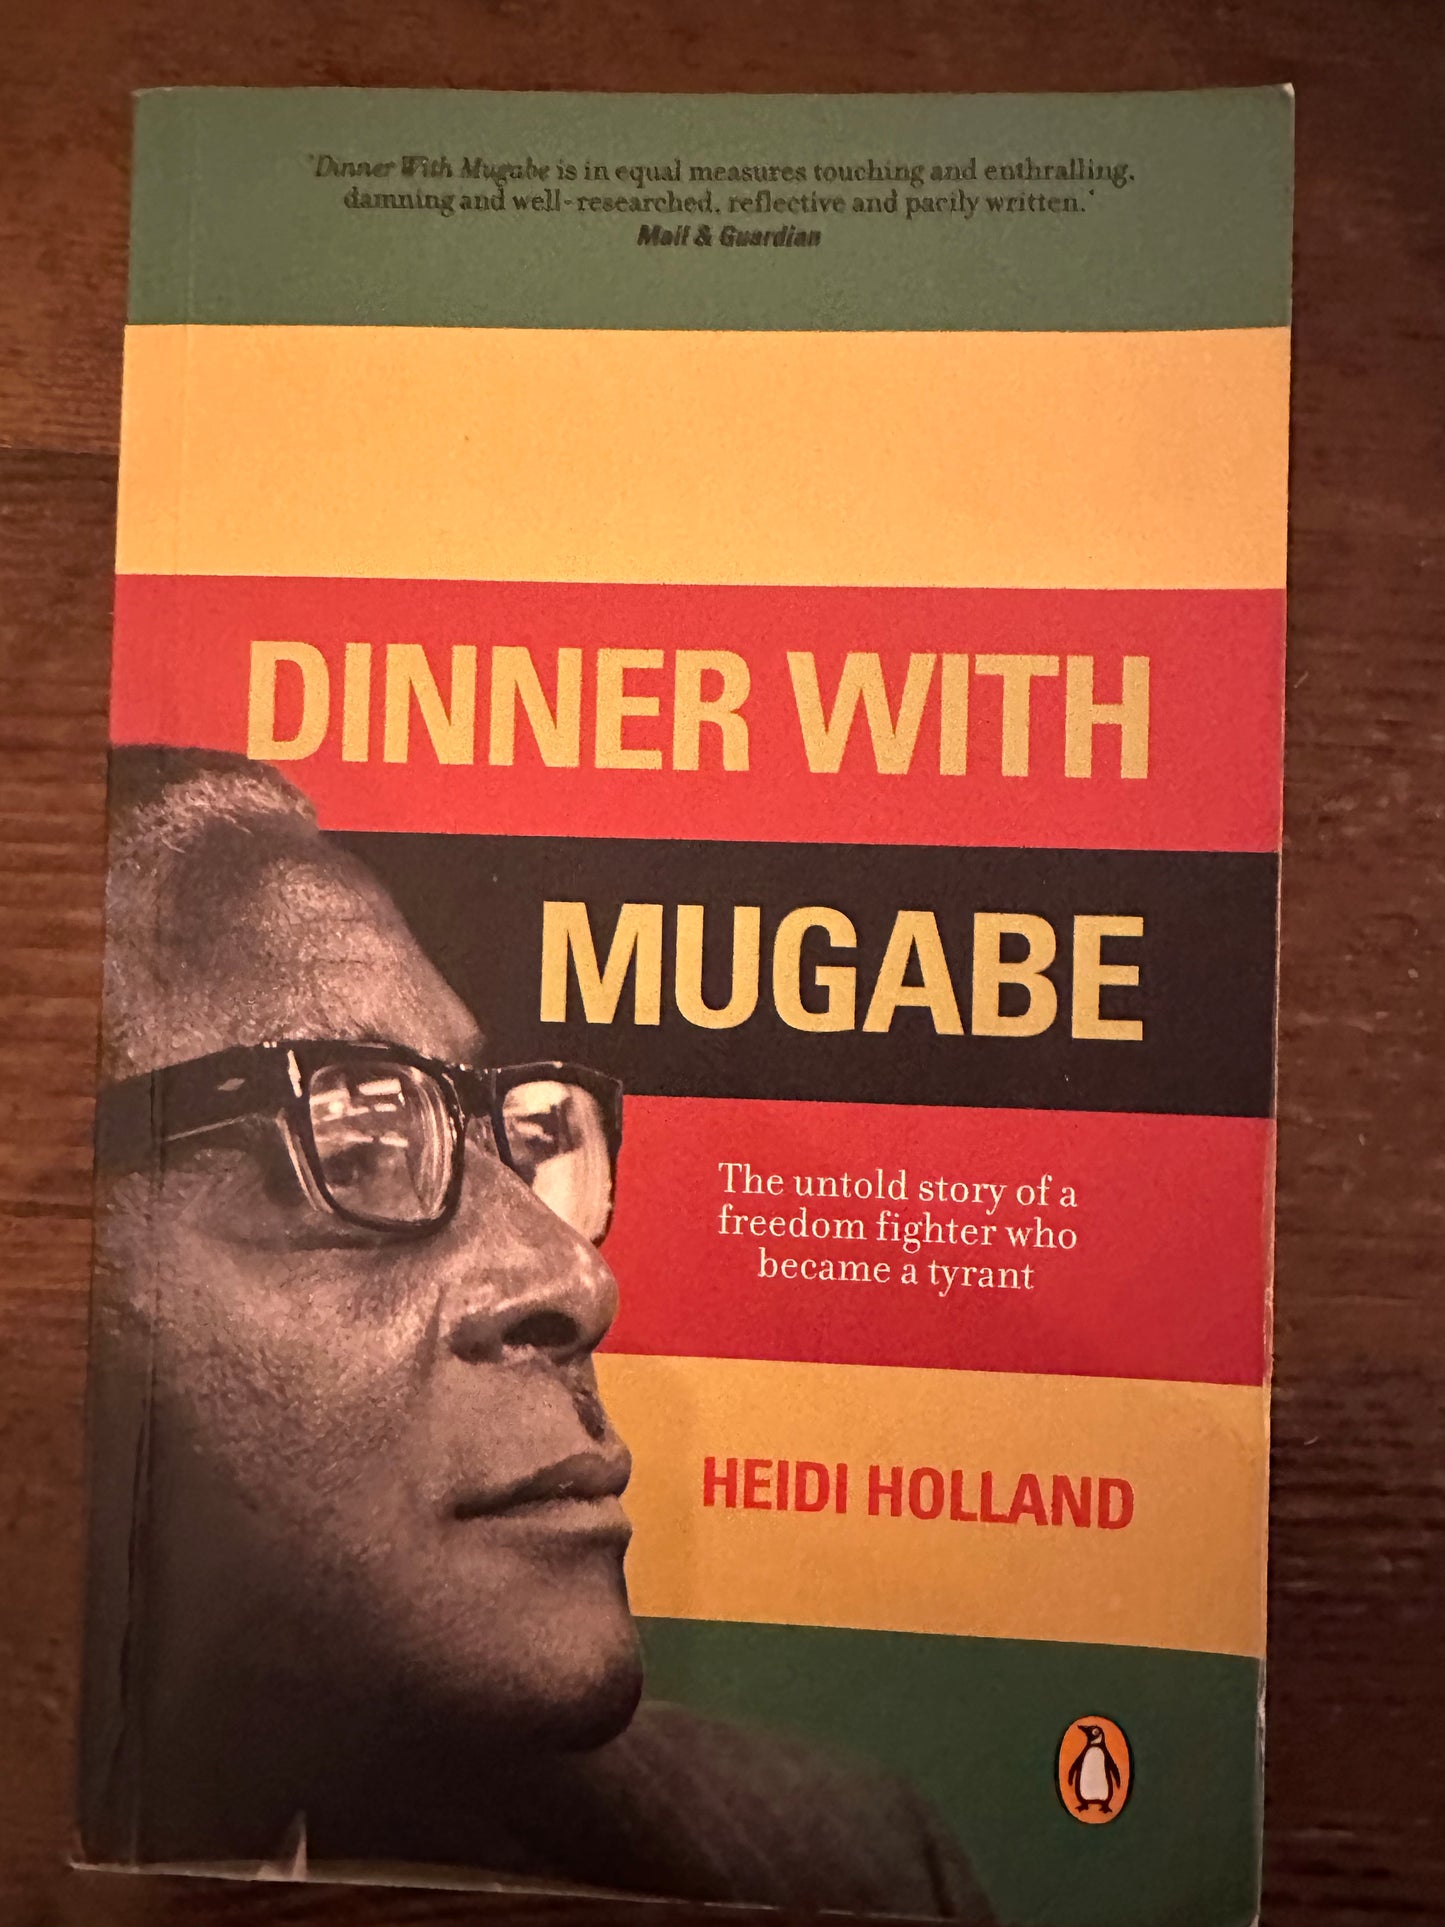 Dinner with Mugabe, by Heidi Holland (used, paperback)